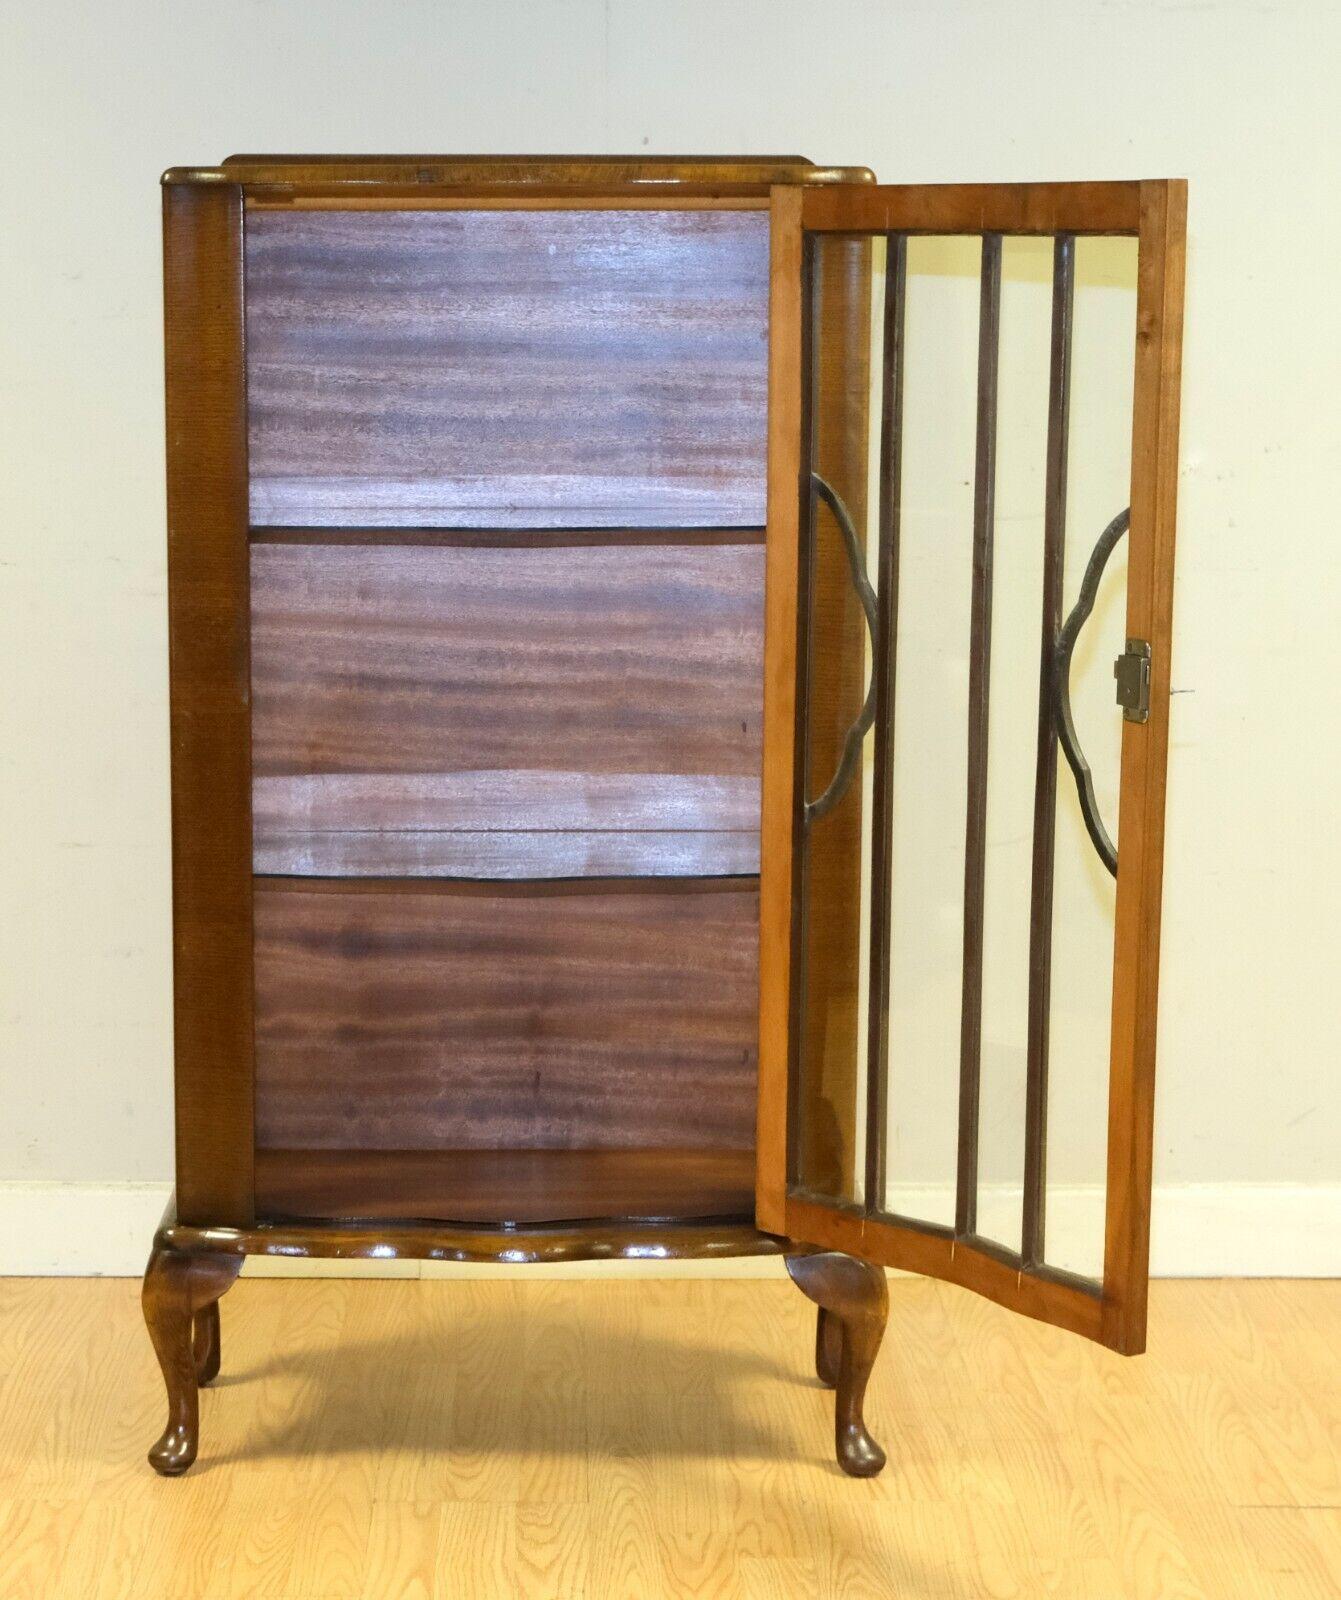 Glass SMALL GORGEOUS WALNUT GLAZED BOOKCASE WiTH GLASS SHELVES ON QUEEN ANN STYLE LEGS For Sale